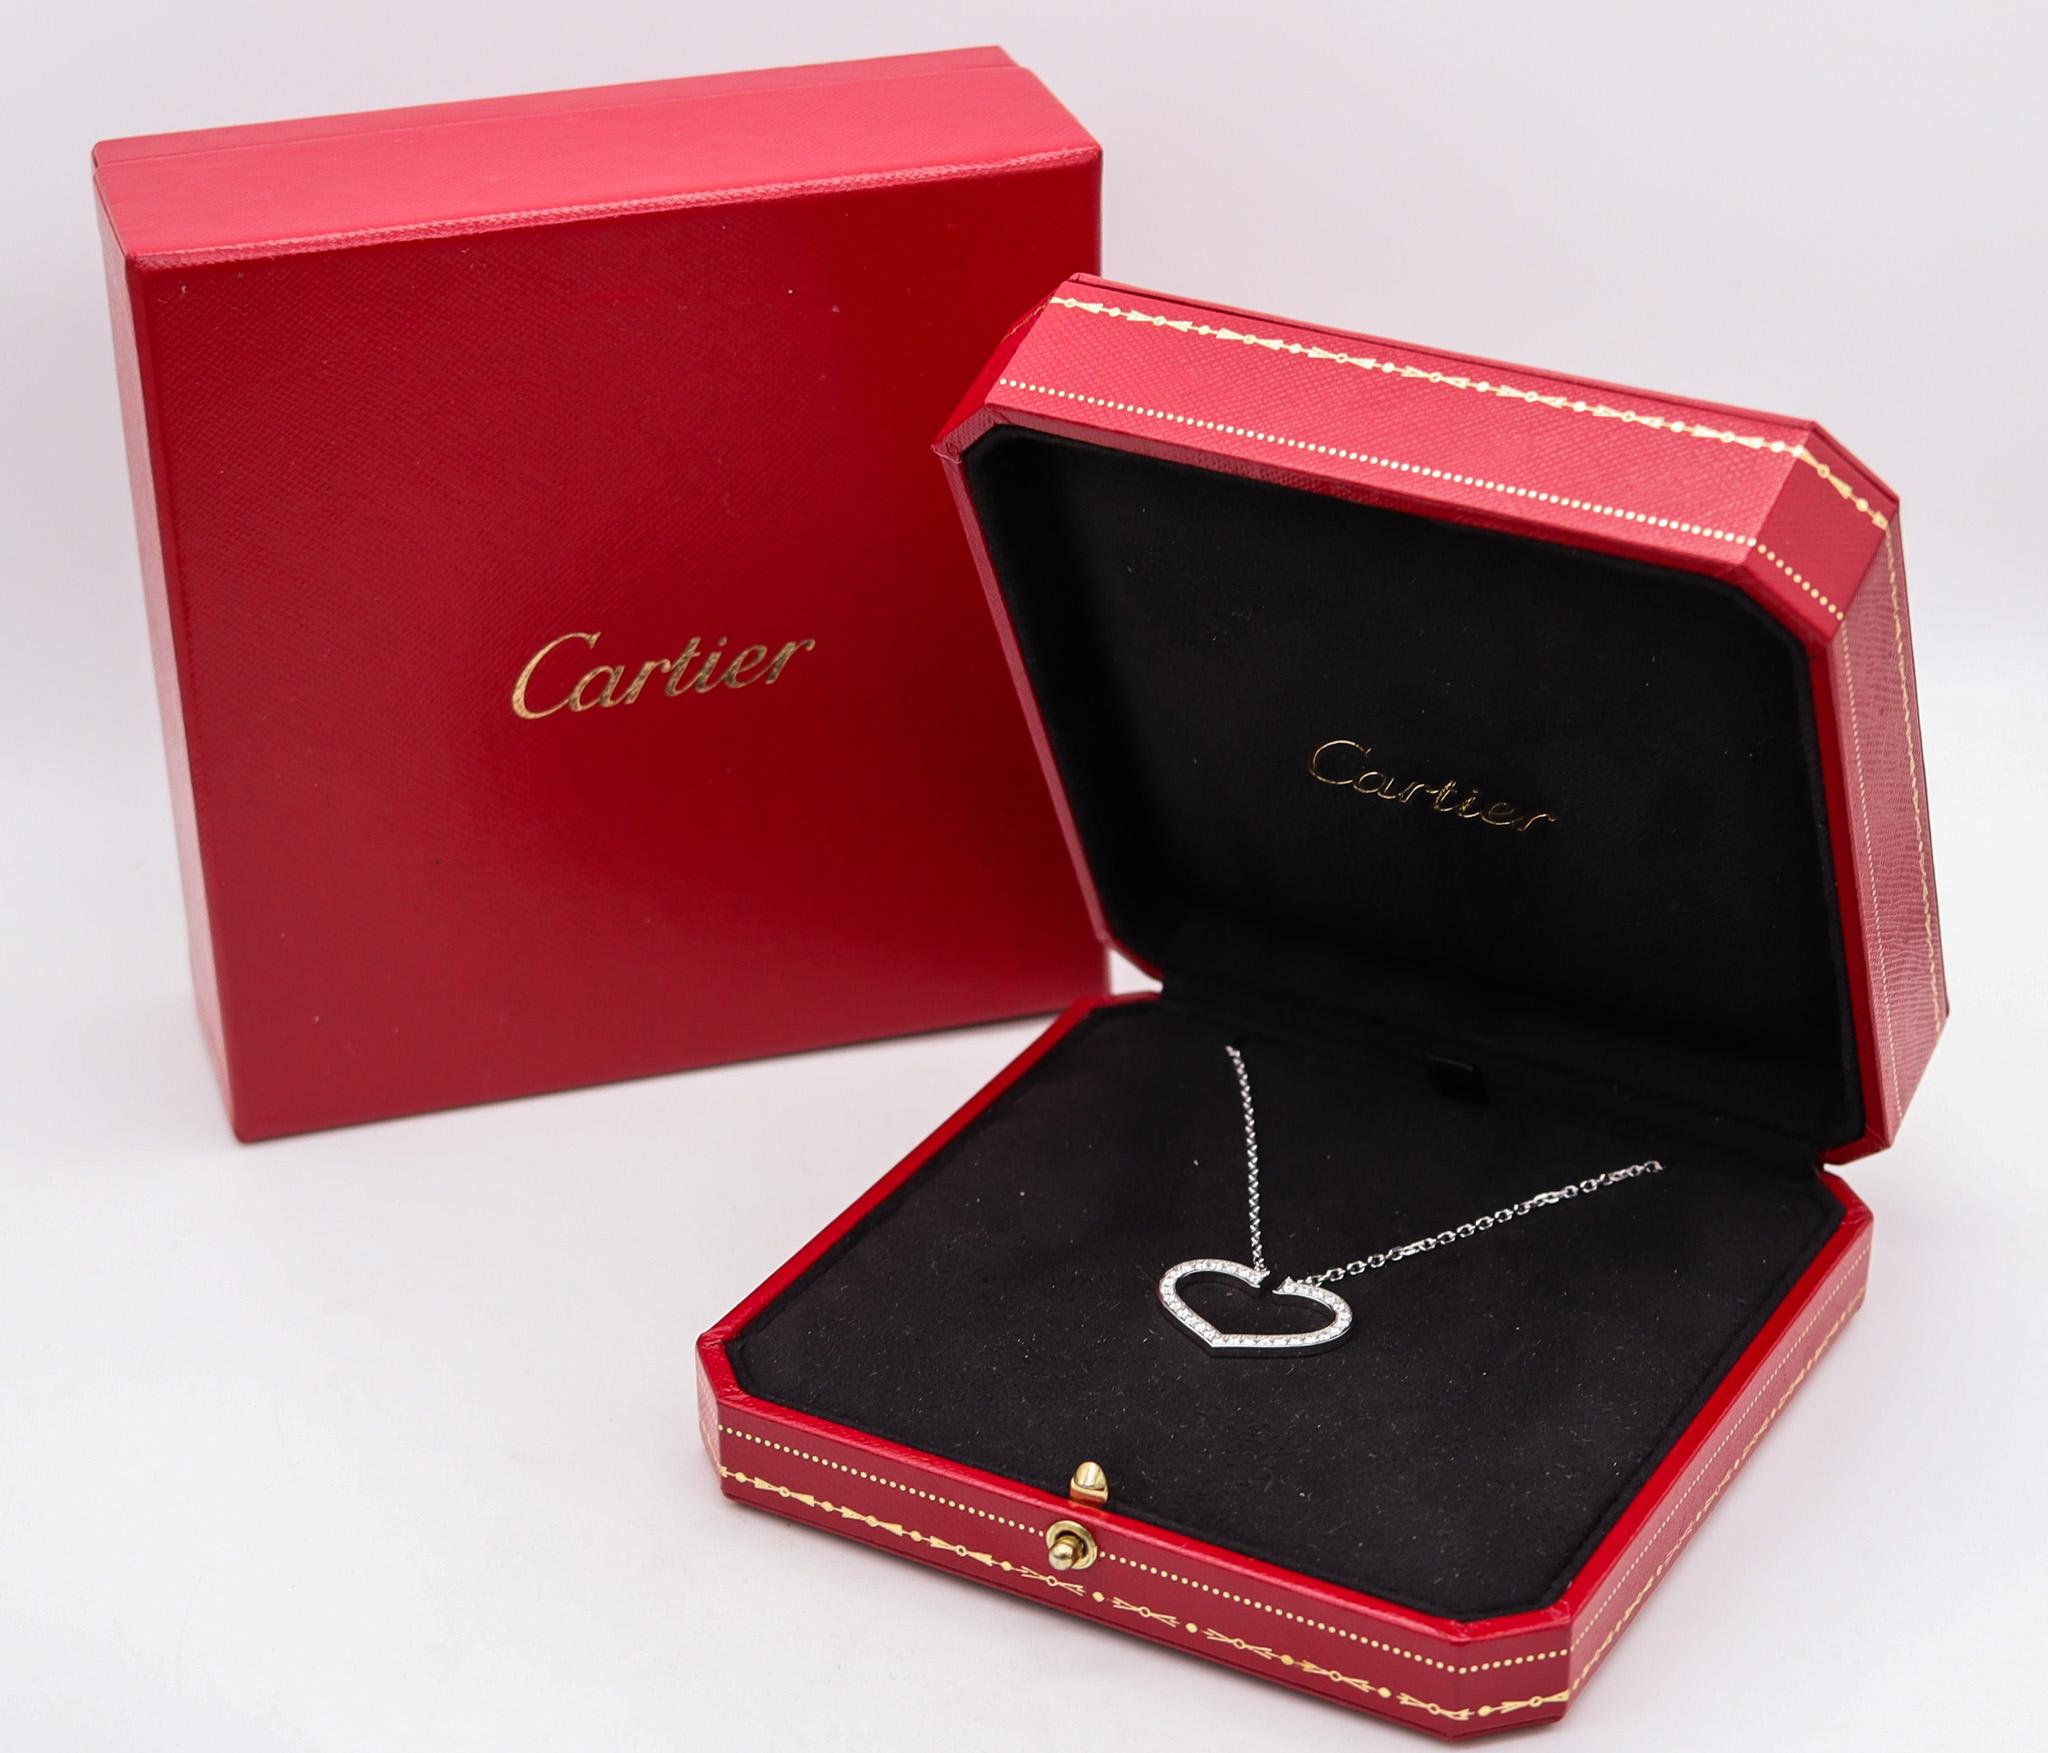 C necklace chain designed by Cartier.

Beautiful contemporary necklace, created in Paris France by the jewelry house of Cartier. This necklace is part of the C of Cartier collection and was crafted in solid white gold of 18 karats with high polished